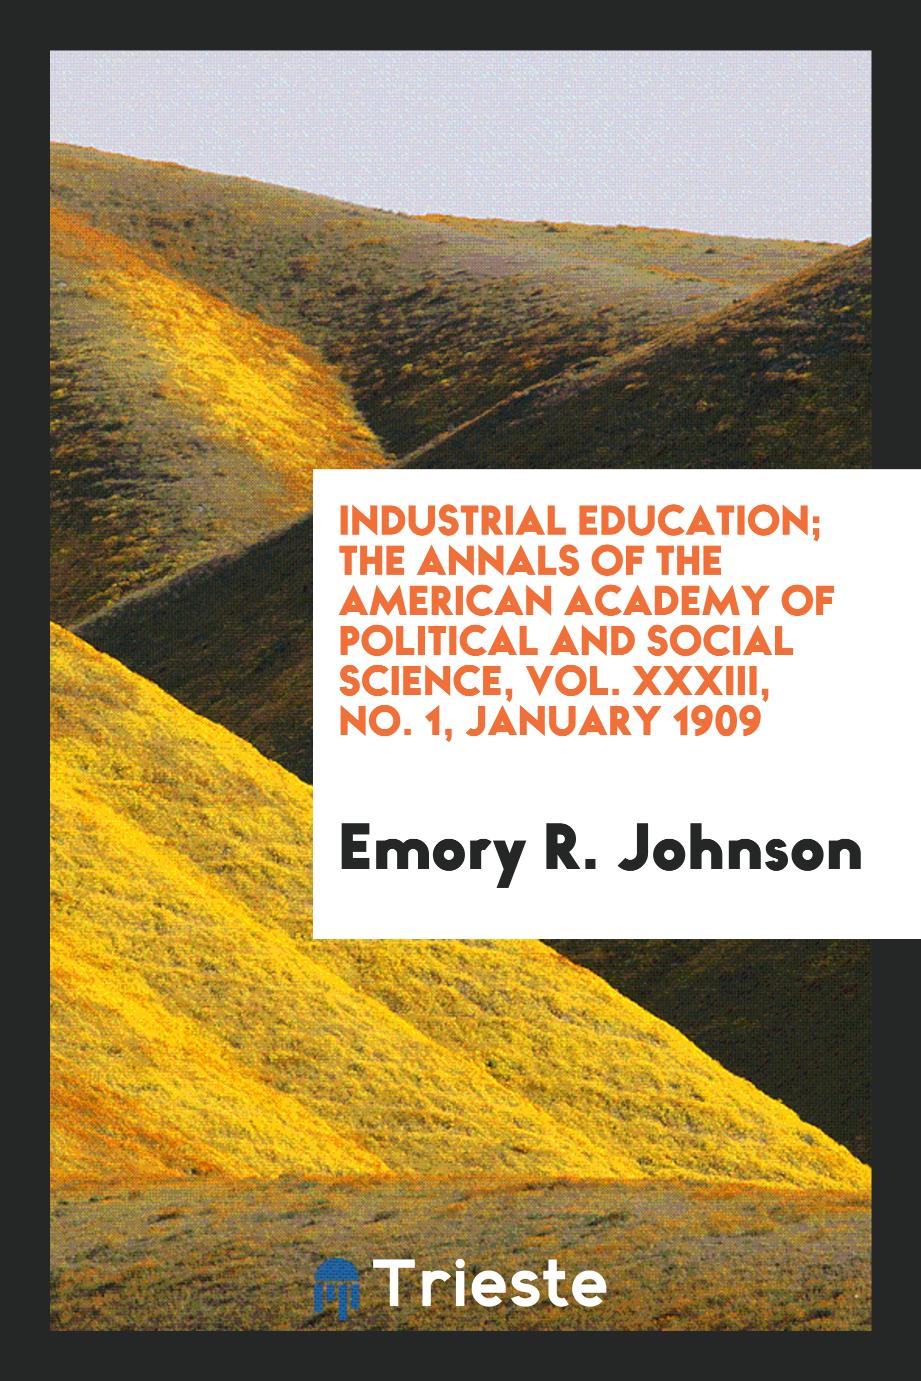 Industrial Education; The Annals of the American Academy of Political and Social Science, Vol. XXXIII, No. 1, January 1909